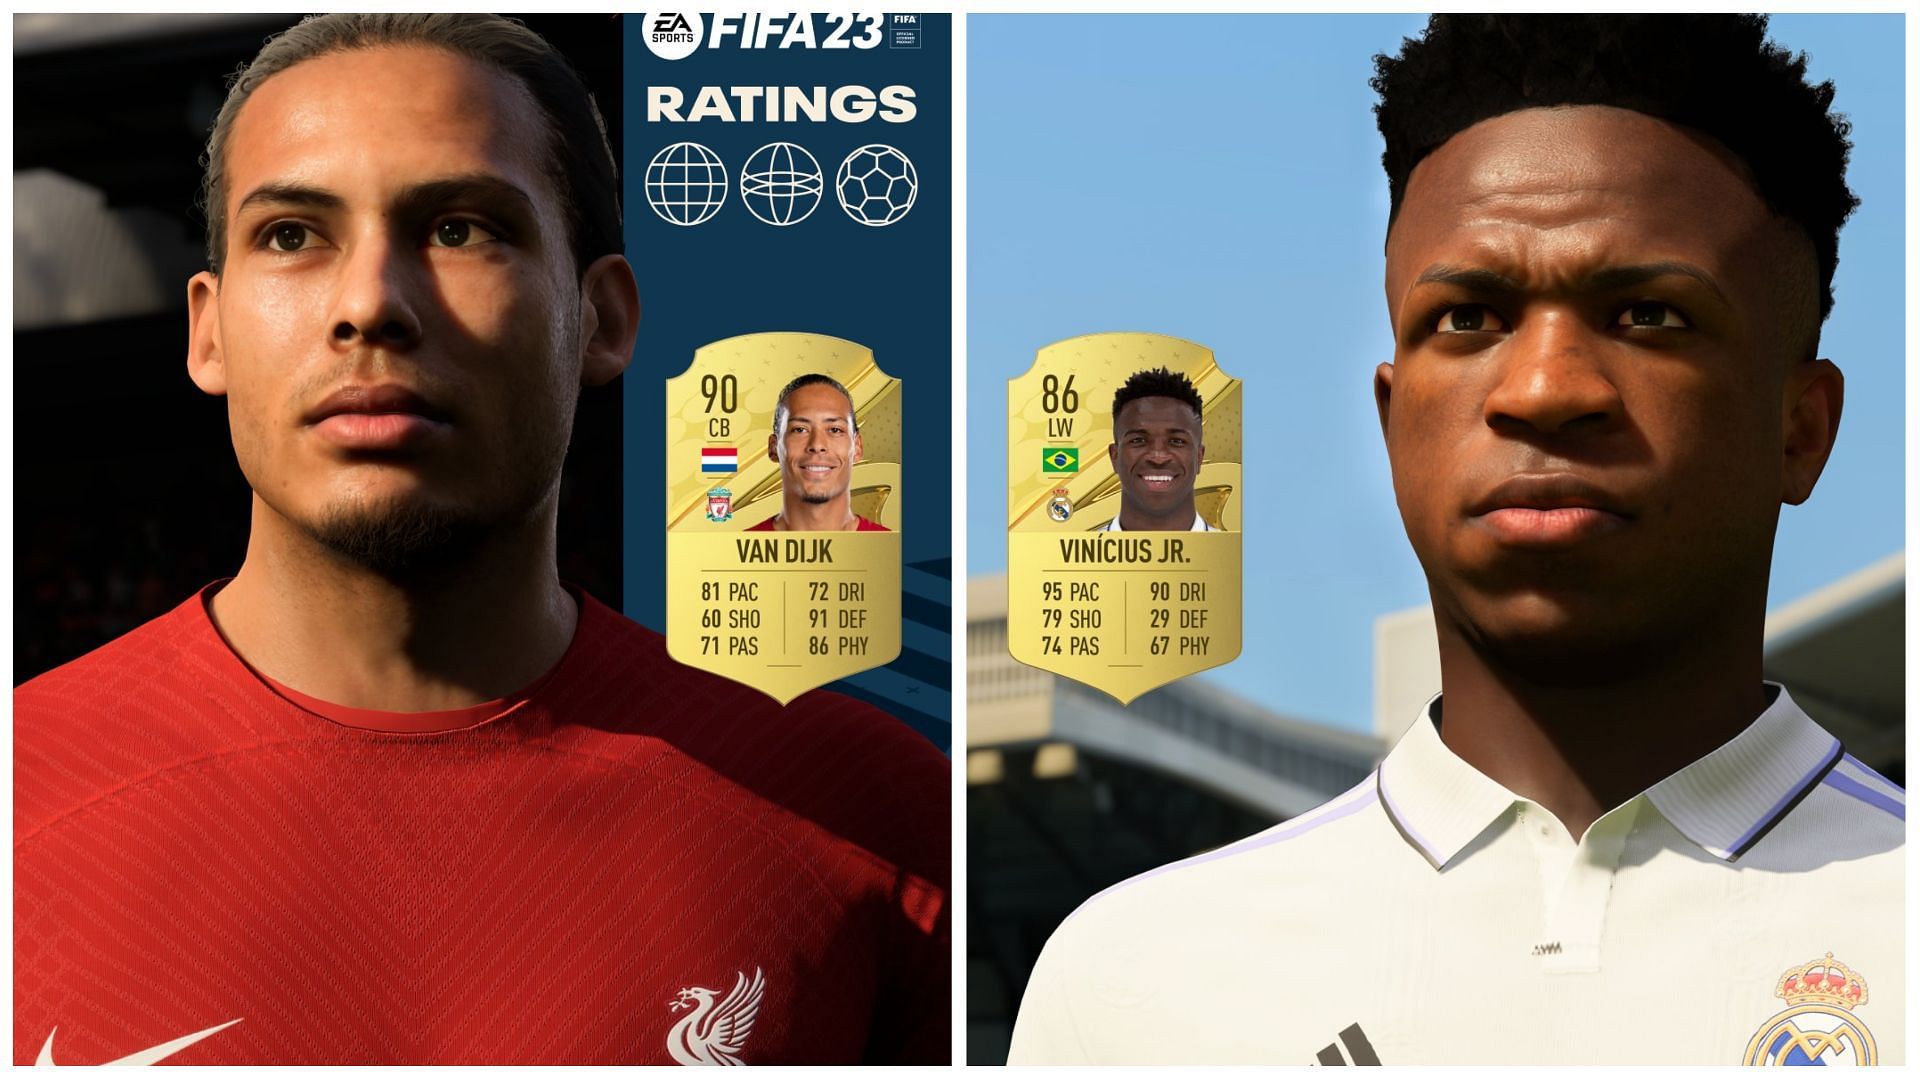 FIFA 23 ambassadors ratings have been revealed by EA Sports (Images via EA Sports)